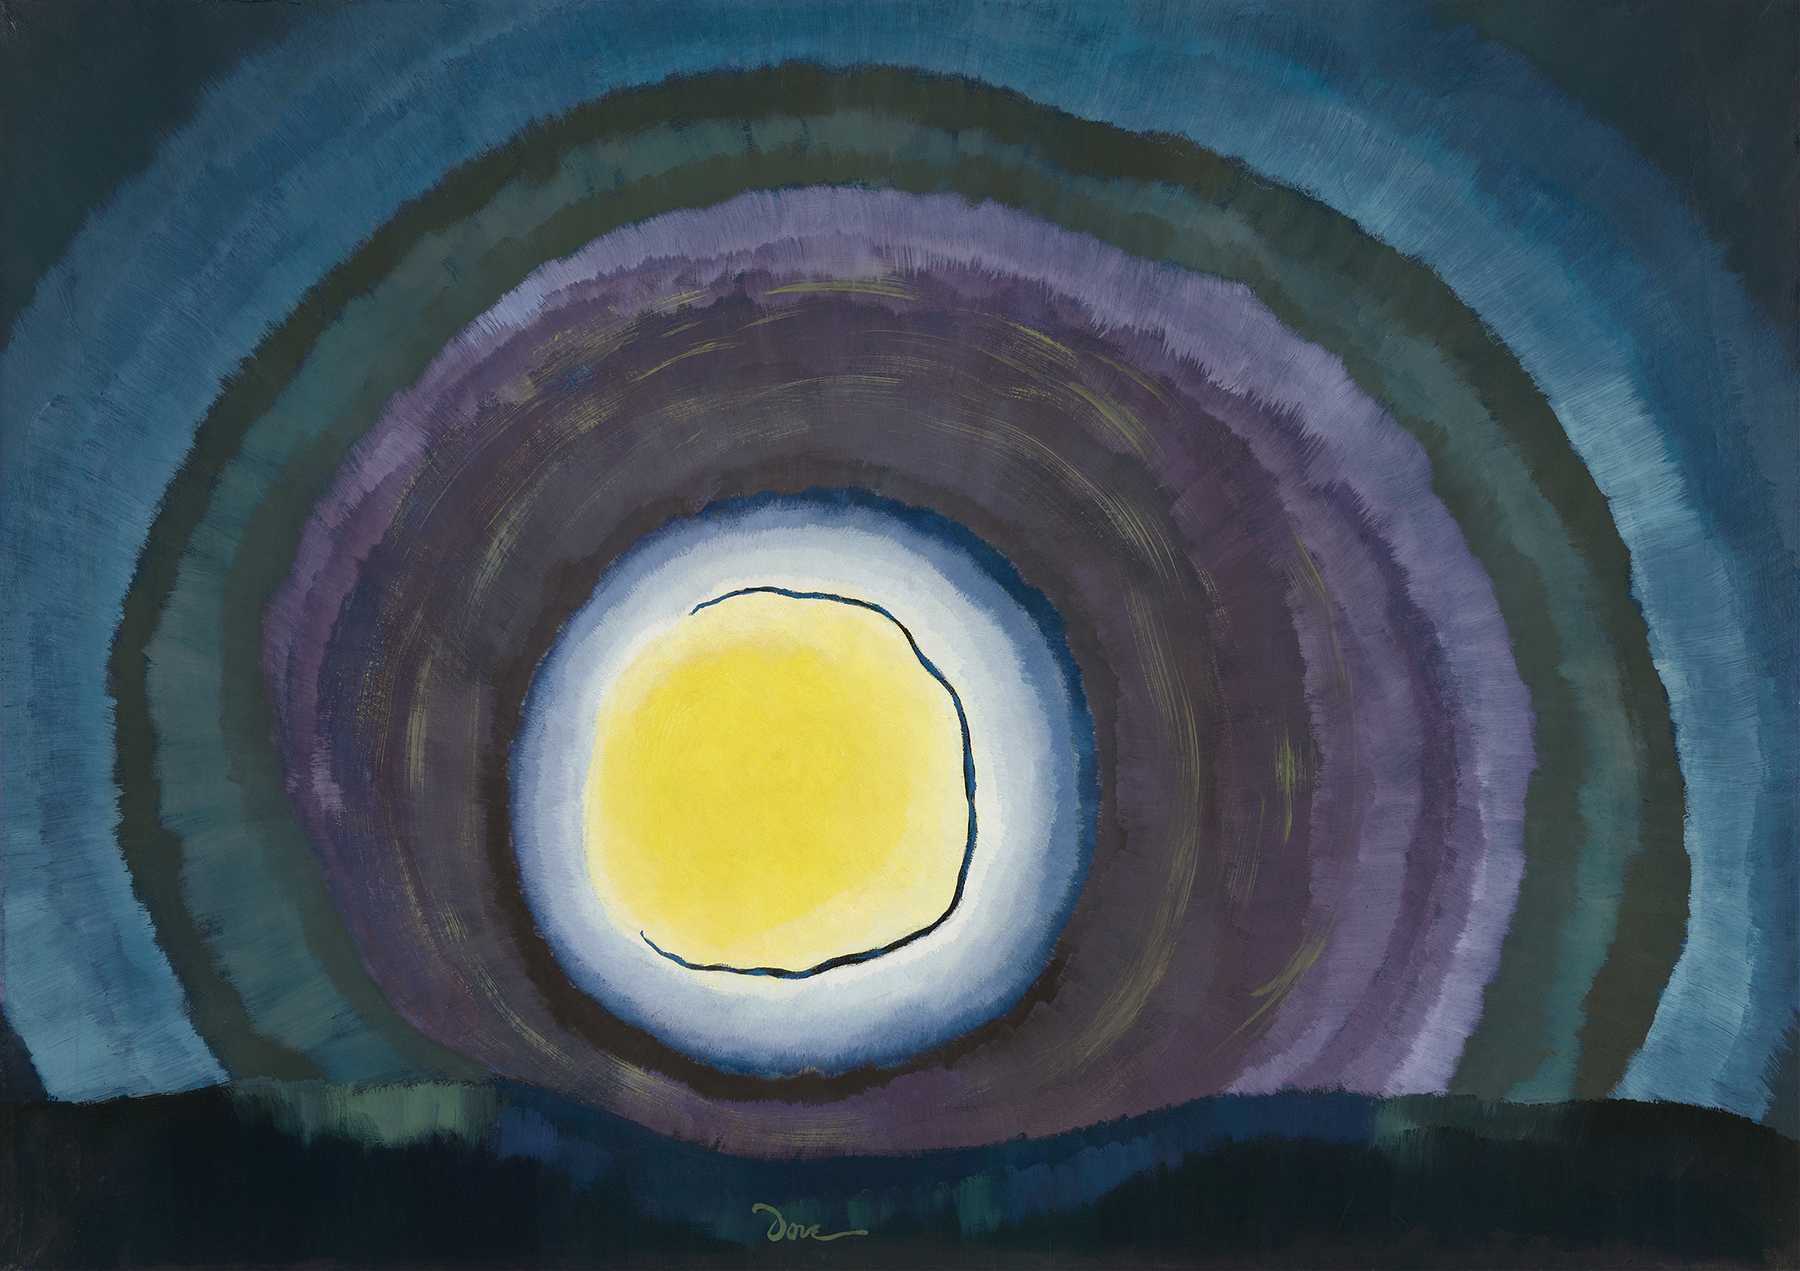 Find out more about Arthur Dove - Sunrise III